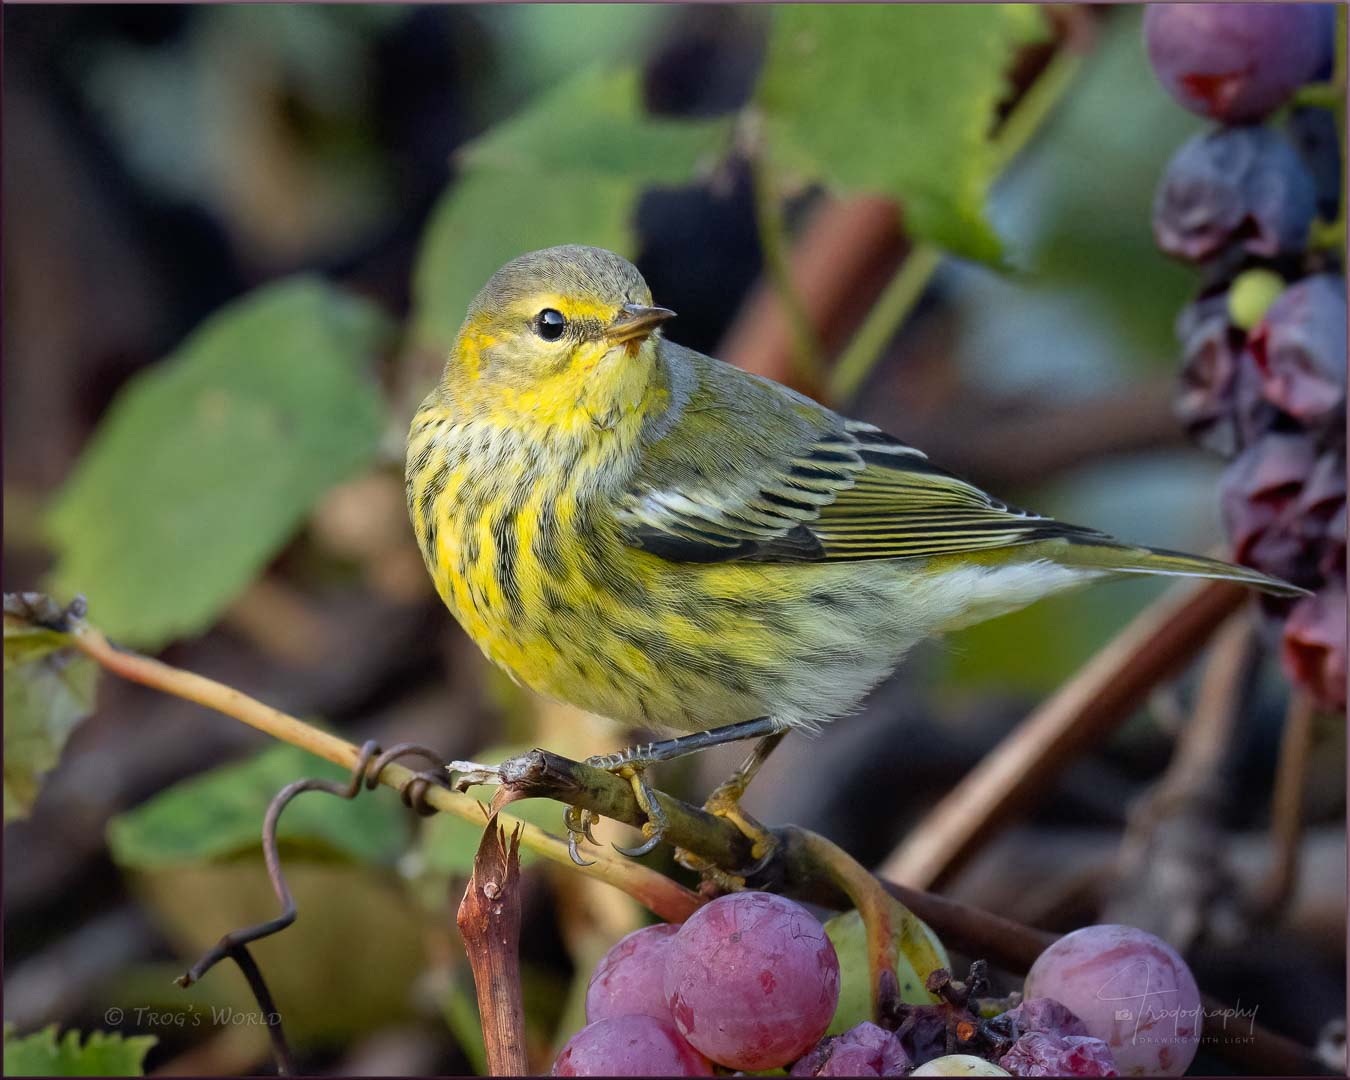 Cape May Warbler in the grapes